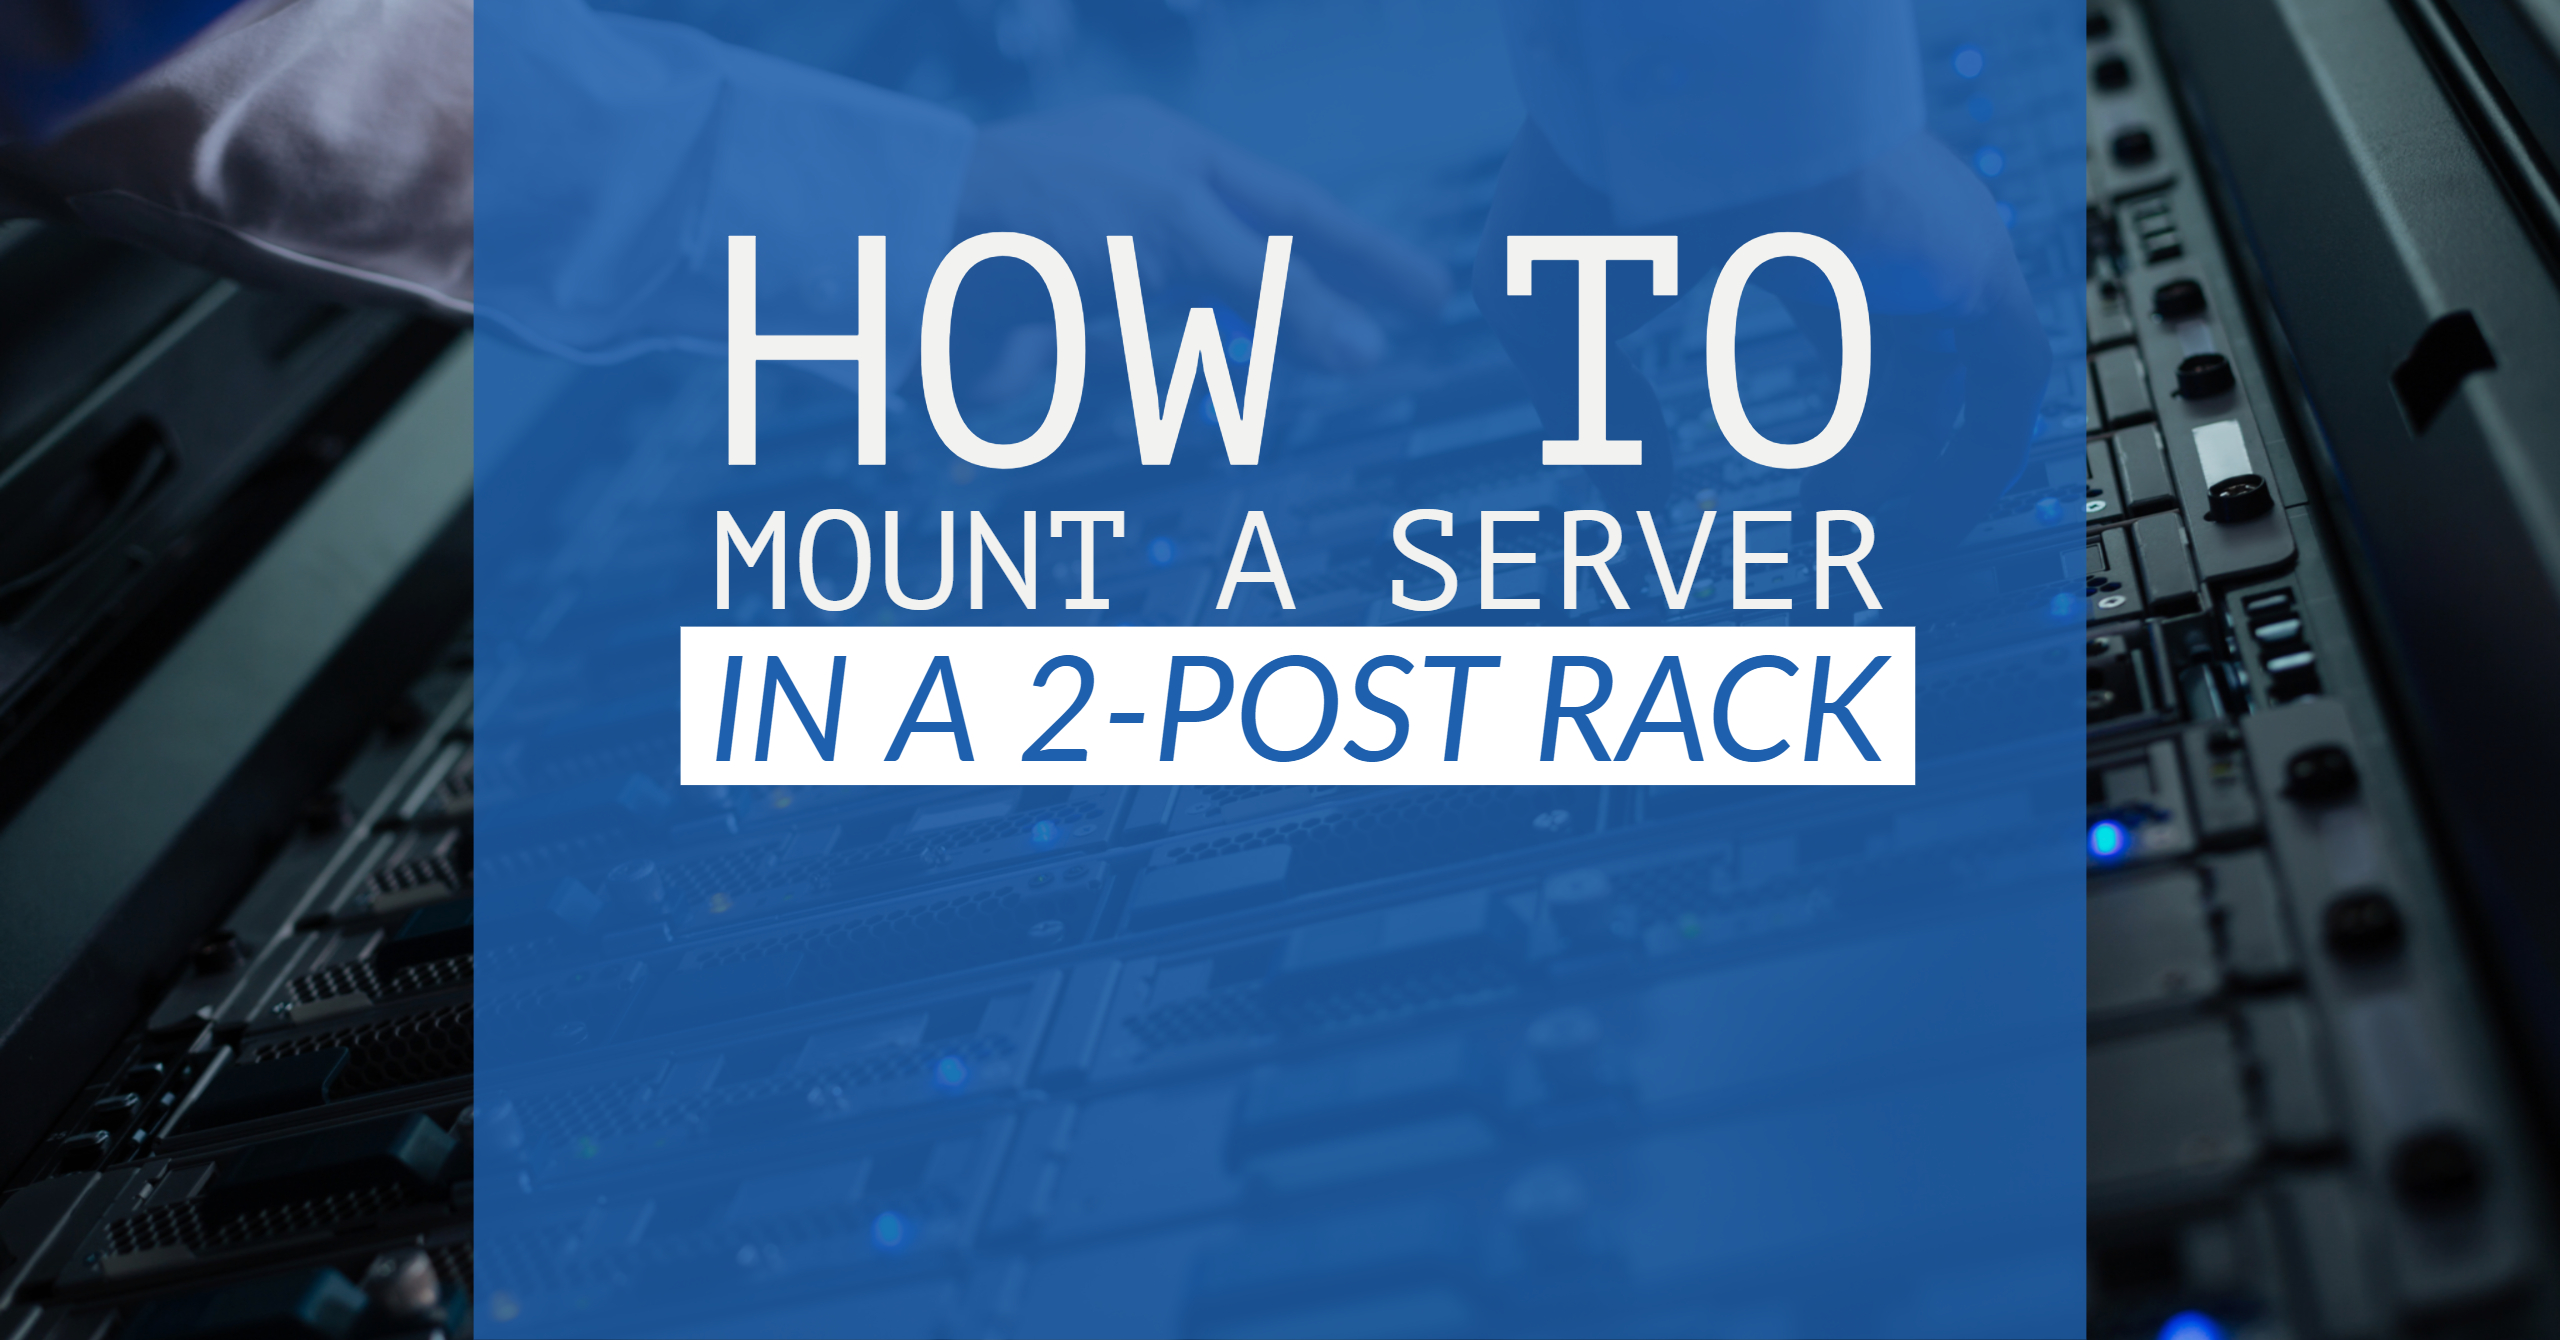 How to Mount a Server in a 2-Post Rack